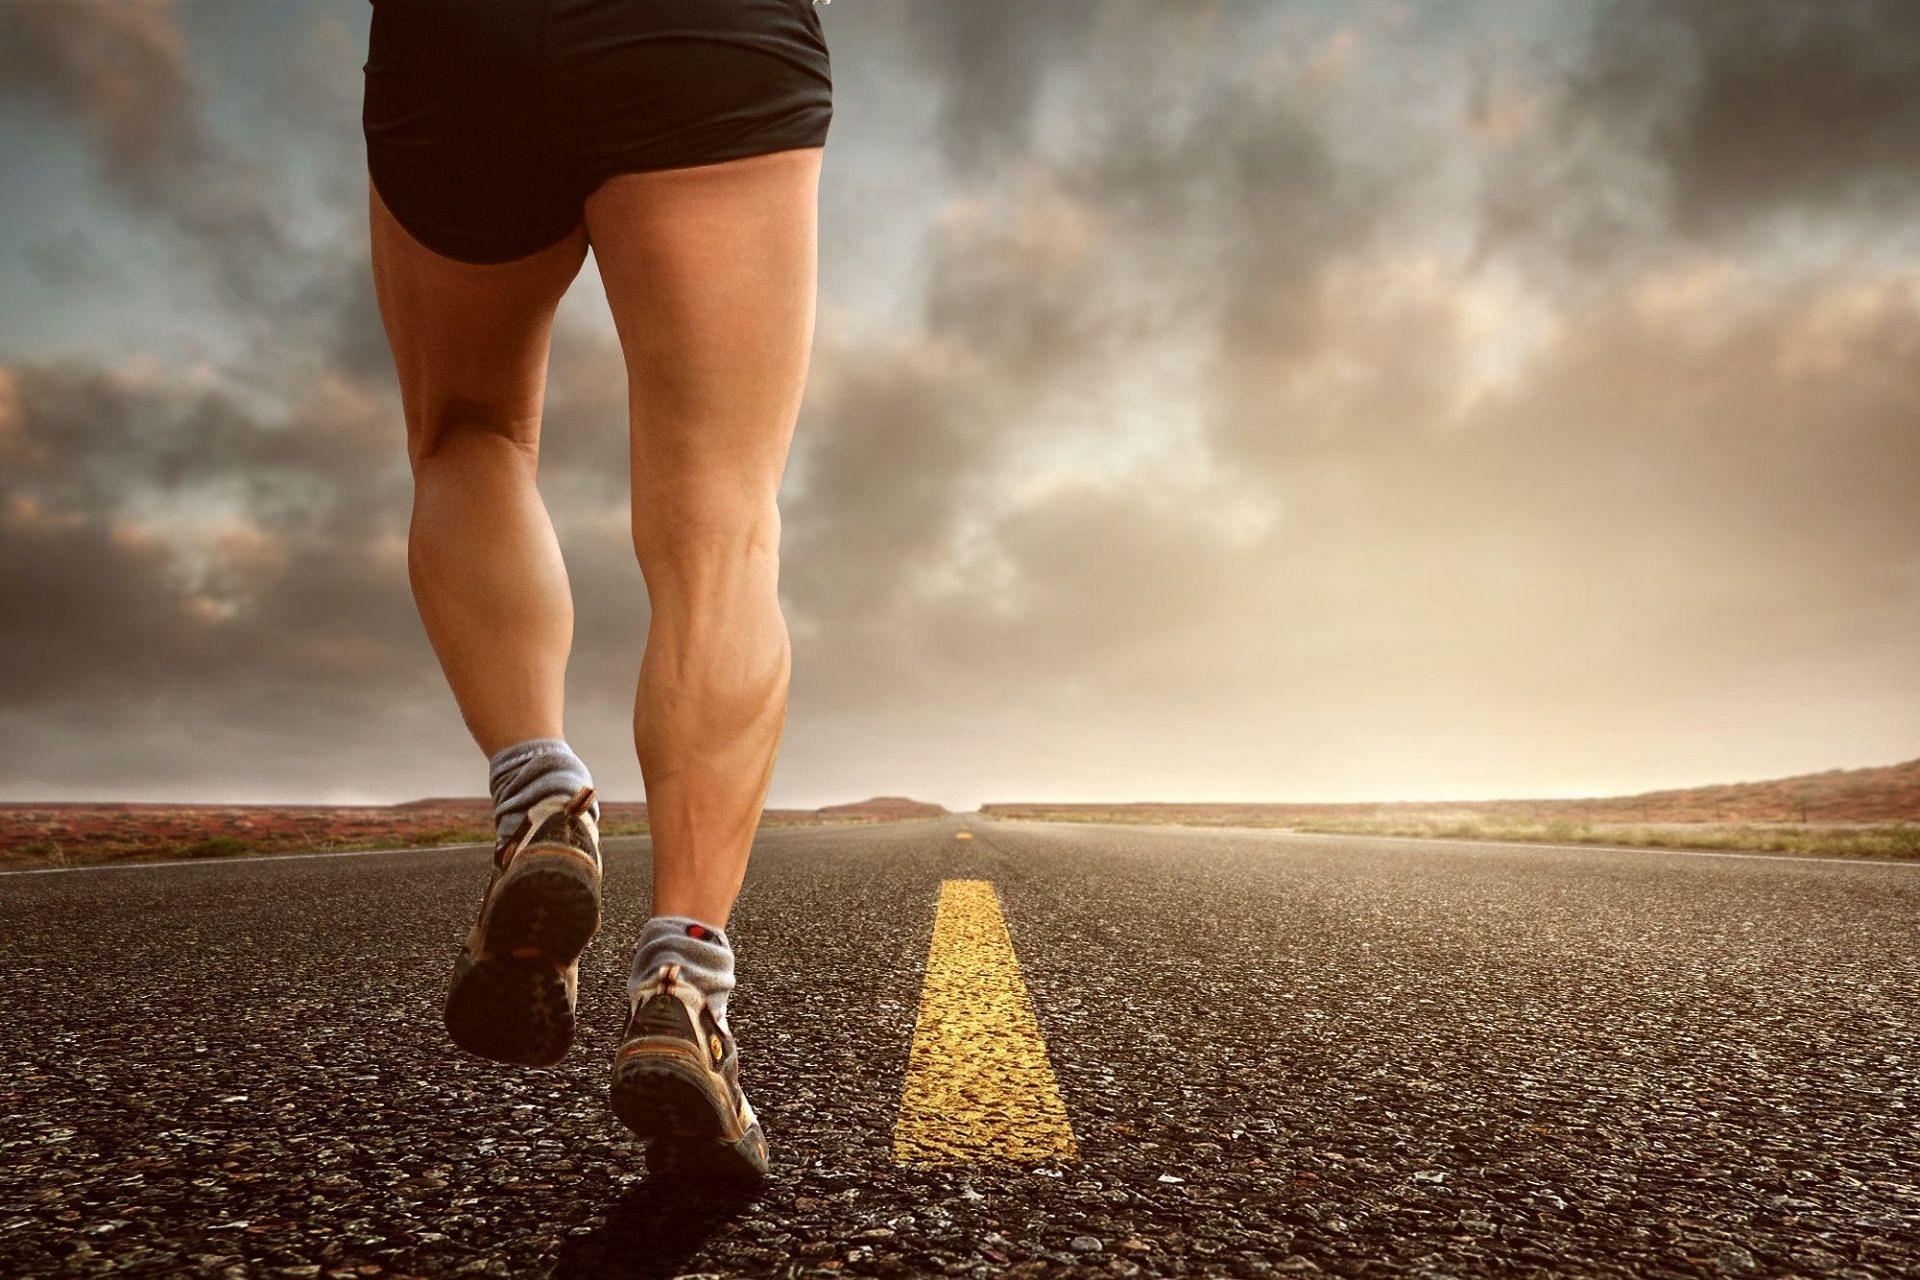 Strengthening your quad muscles helps in improving athletic performance. (Image via Pexels / KinKate)